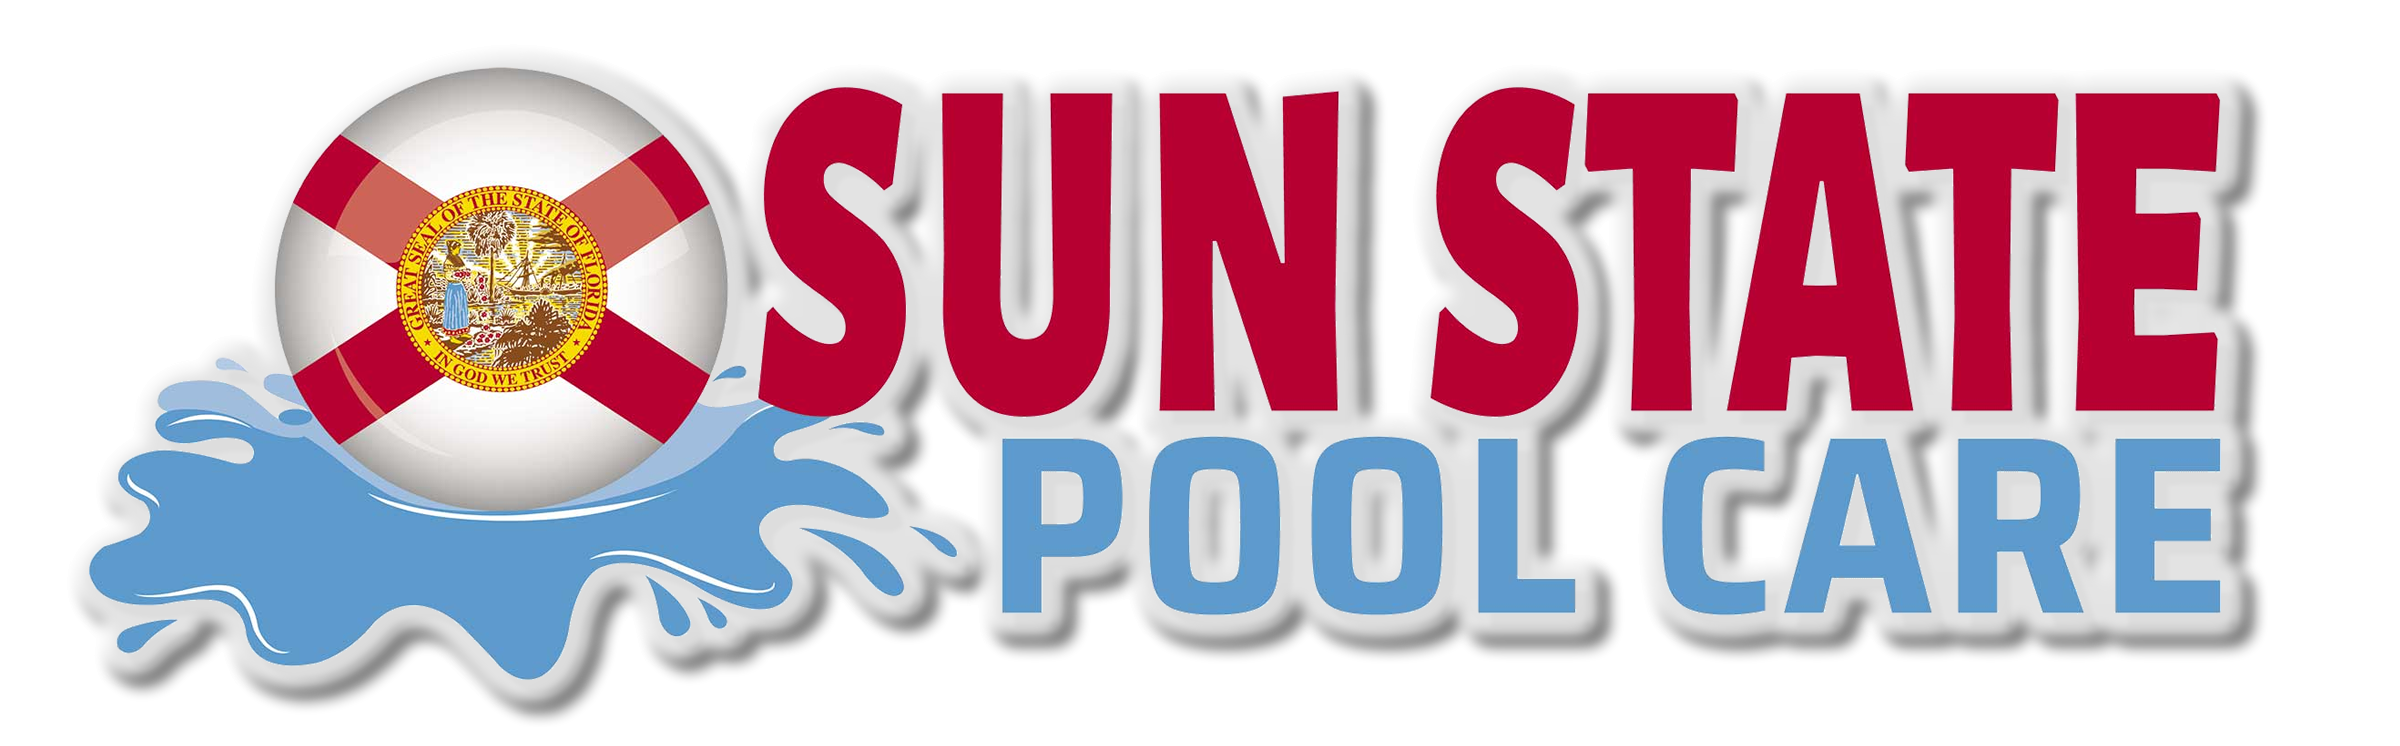 5 Star Pool Service For Wesley Chapel, Fl